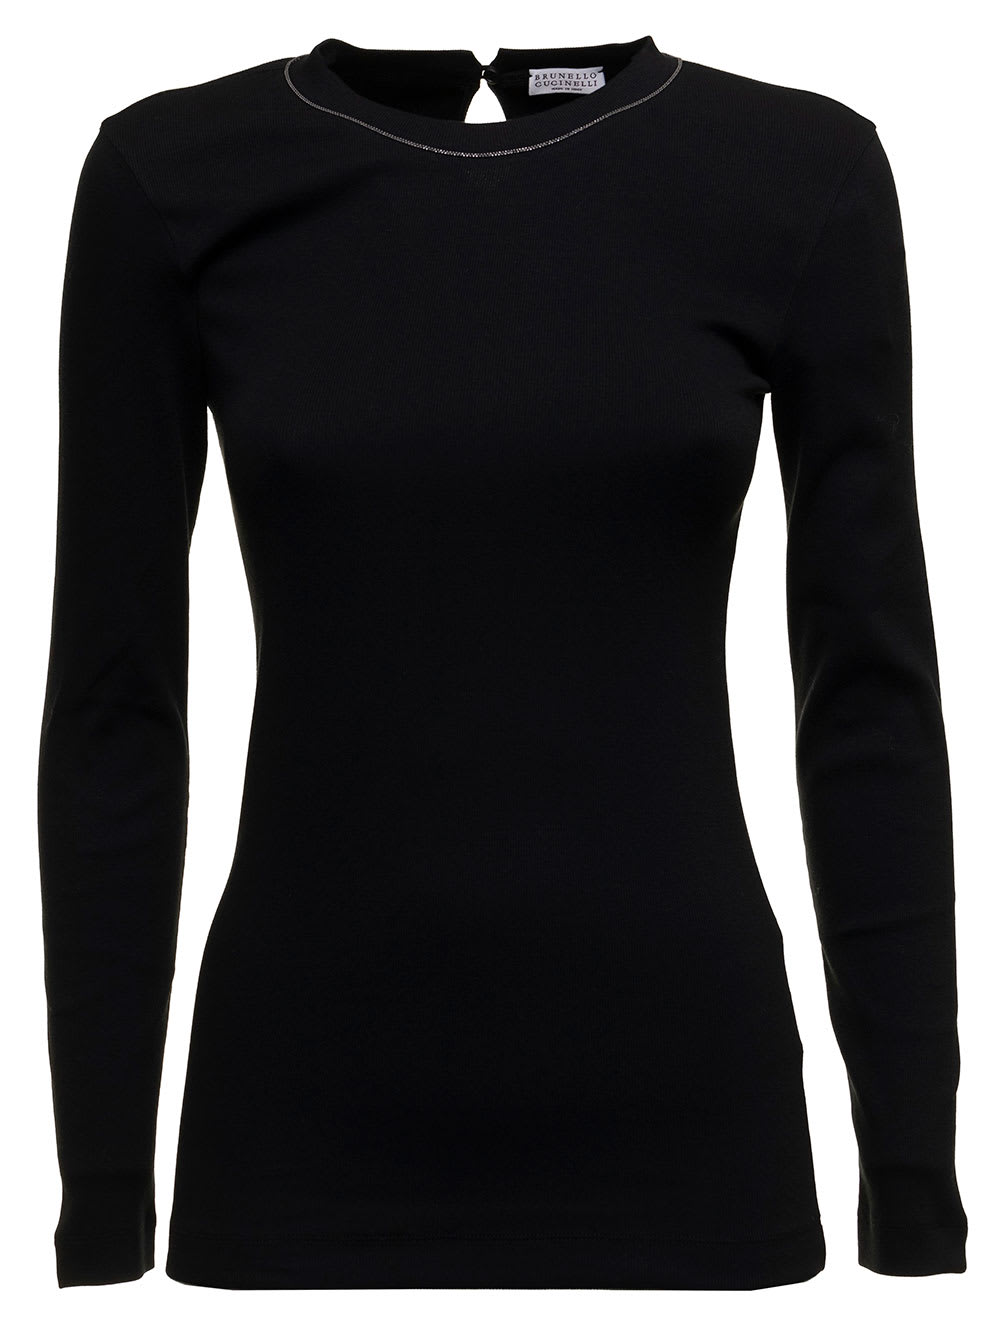 Womans Long-sleeved Black Cotton T-shirt With Monile Crew Neck